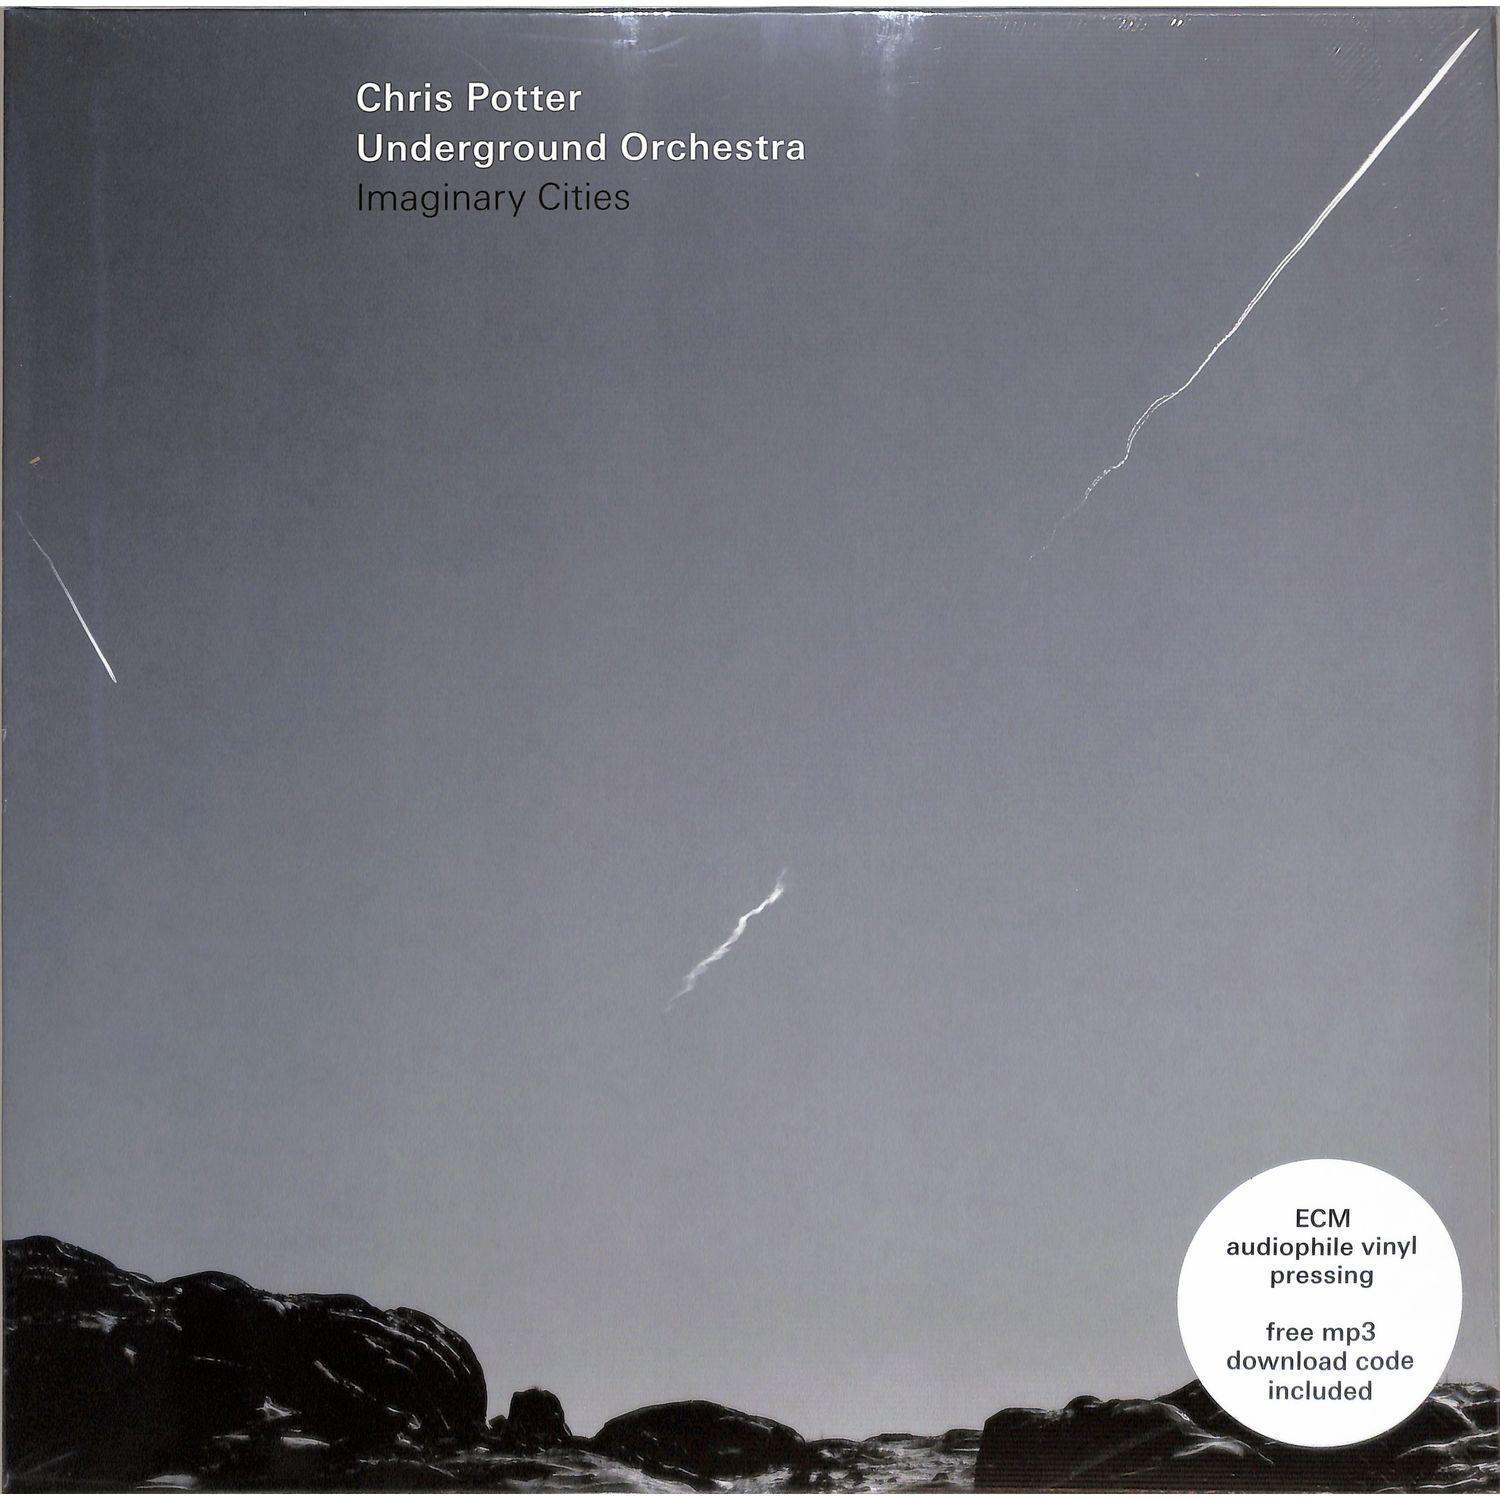 Chris Potter & Underground Orchestra - IMAGINARY CITIES 